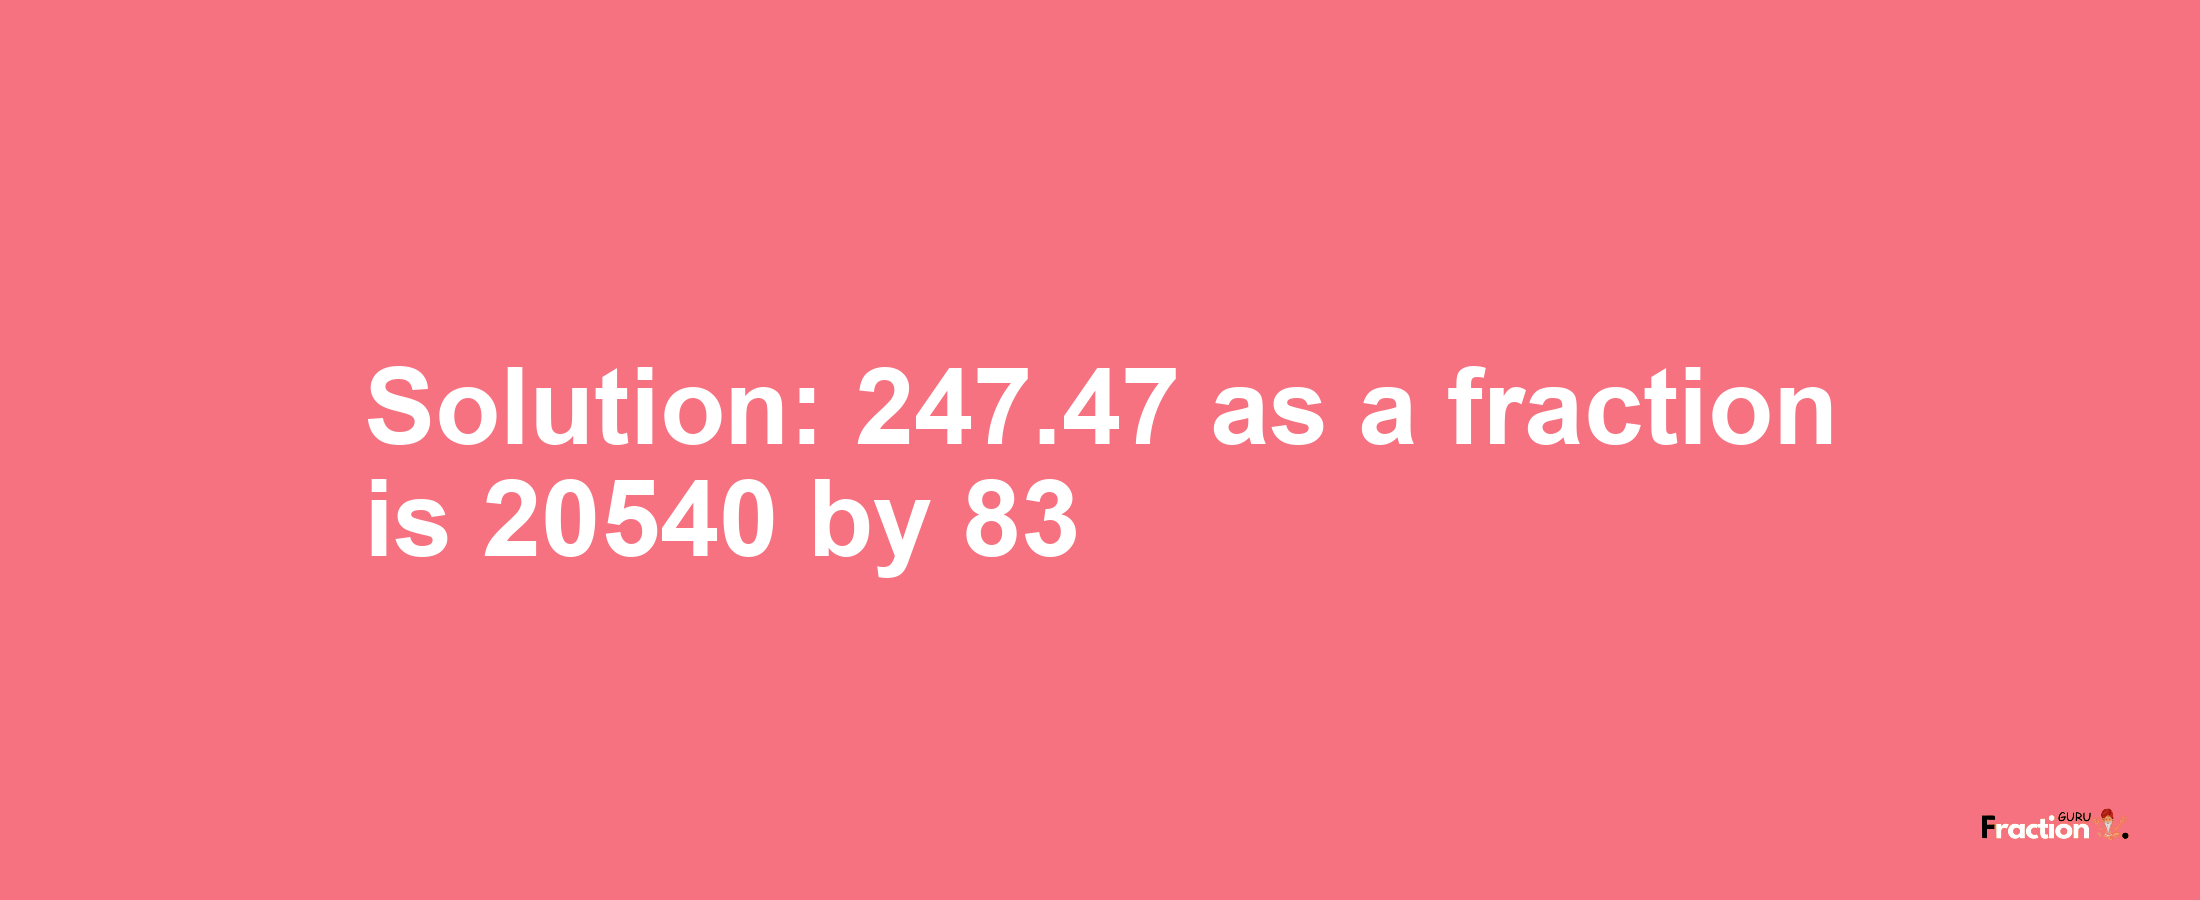 Solution:247.47 as a fraction is 20540/83